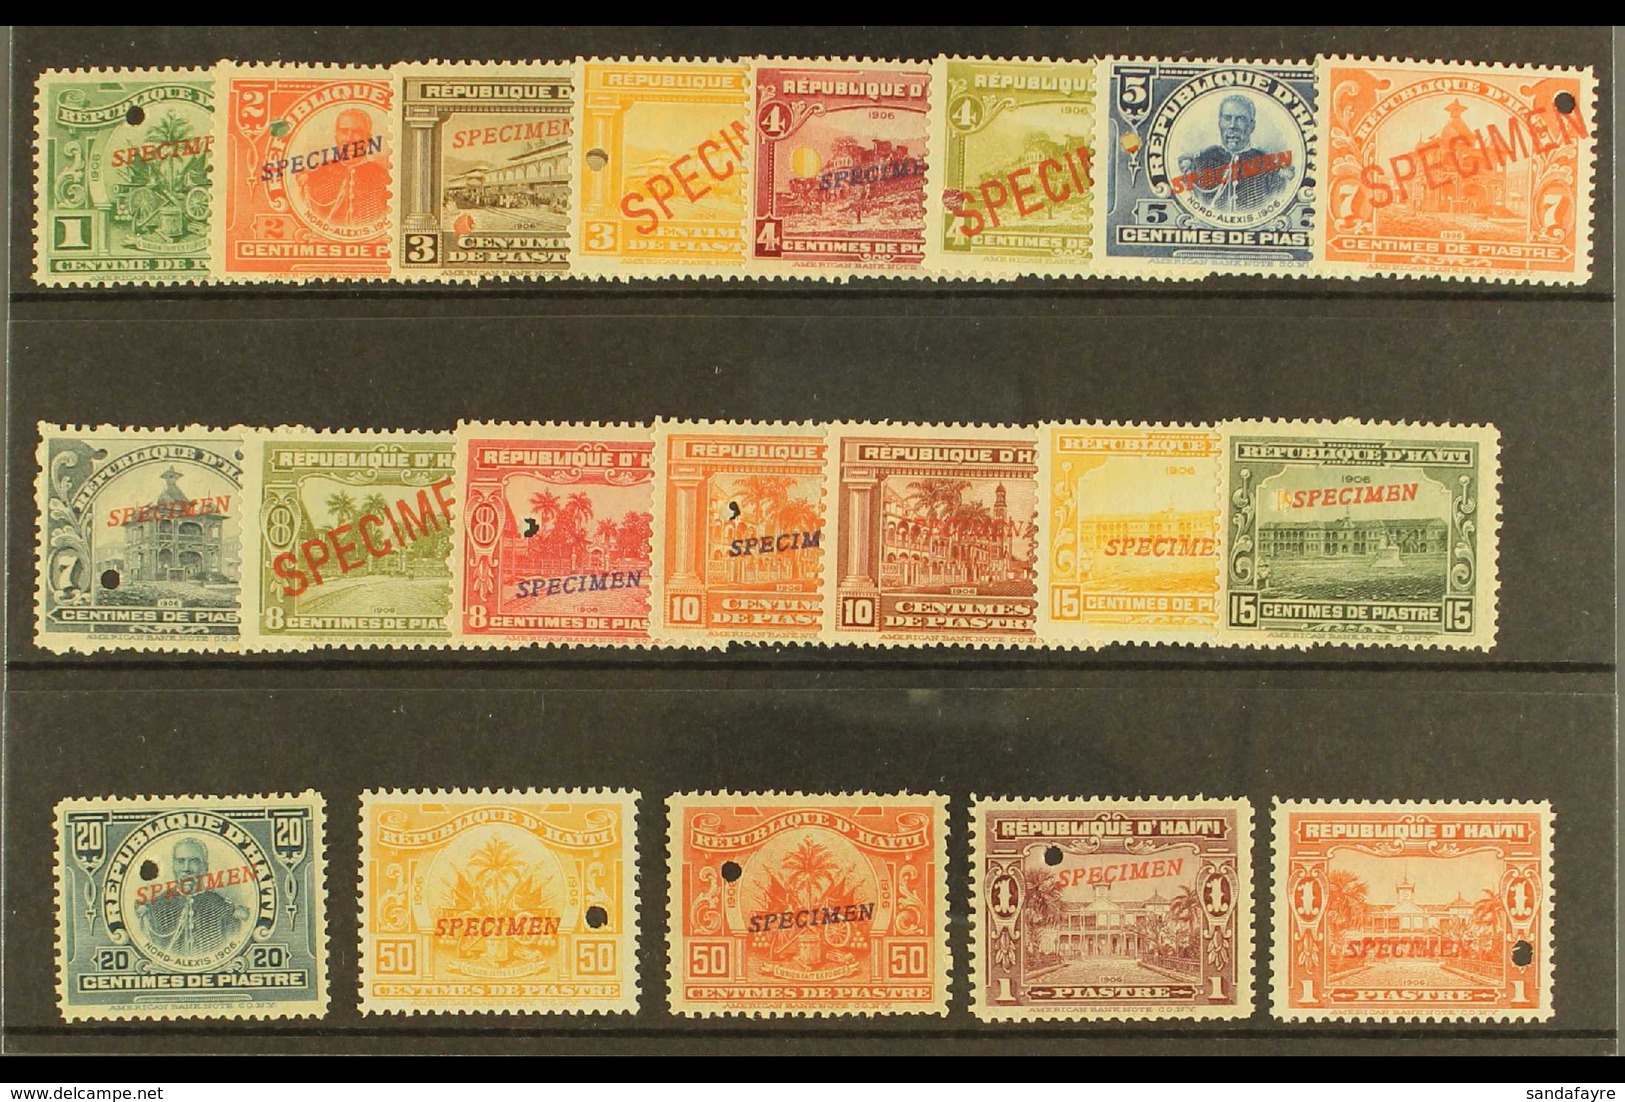 1906-13 Foreign Postage Complete Set With "SPECIMEN" Overprints (Scott 125/44, SG 137/49 & 167/73), Very Fine Never Hing - Haiti